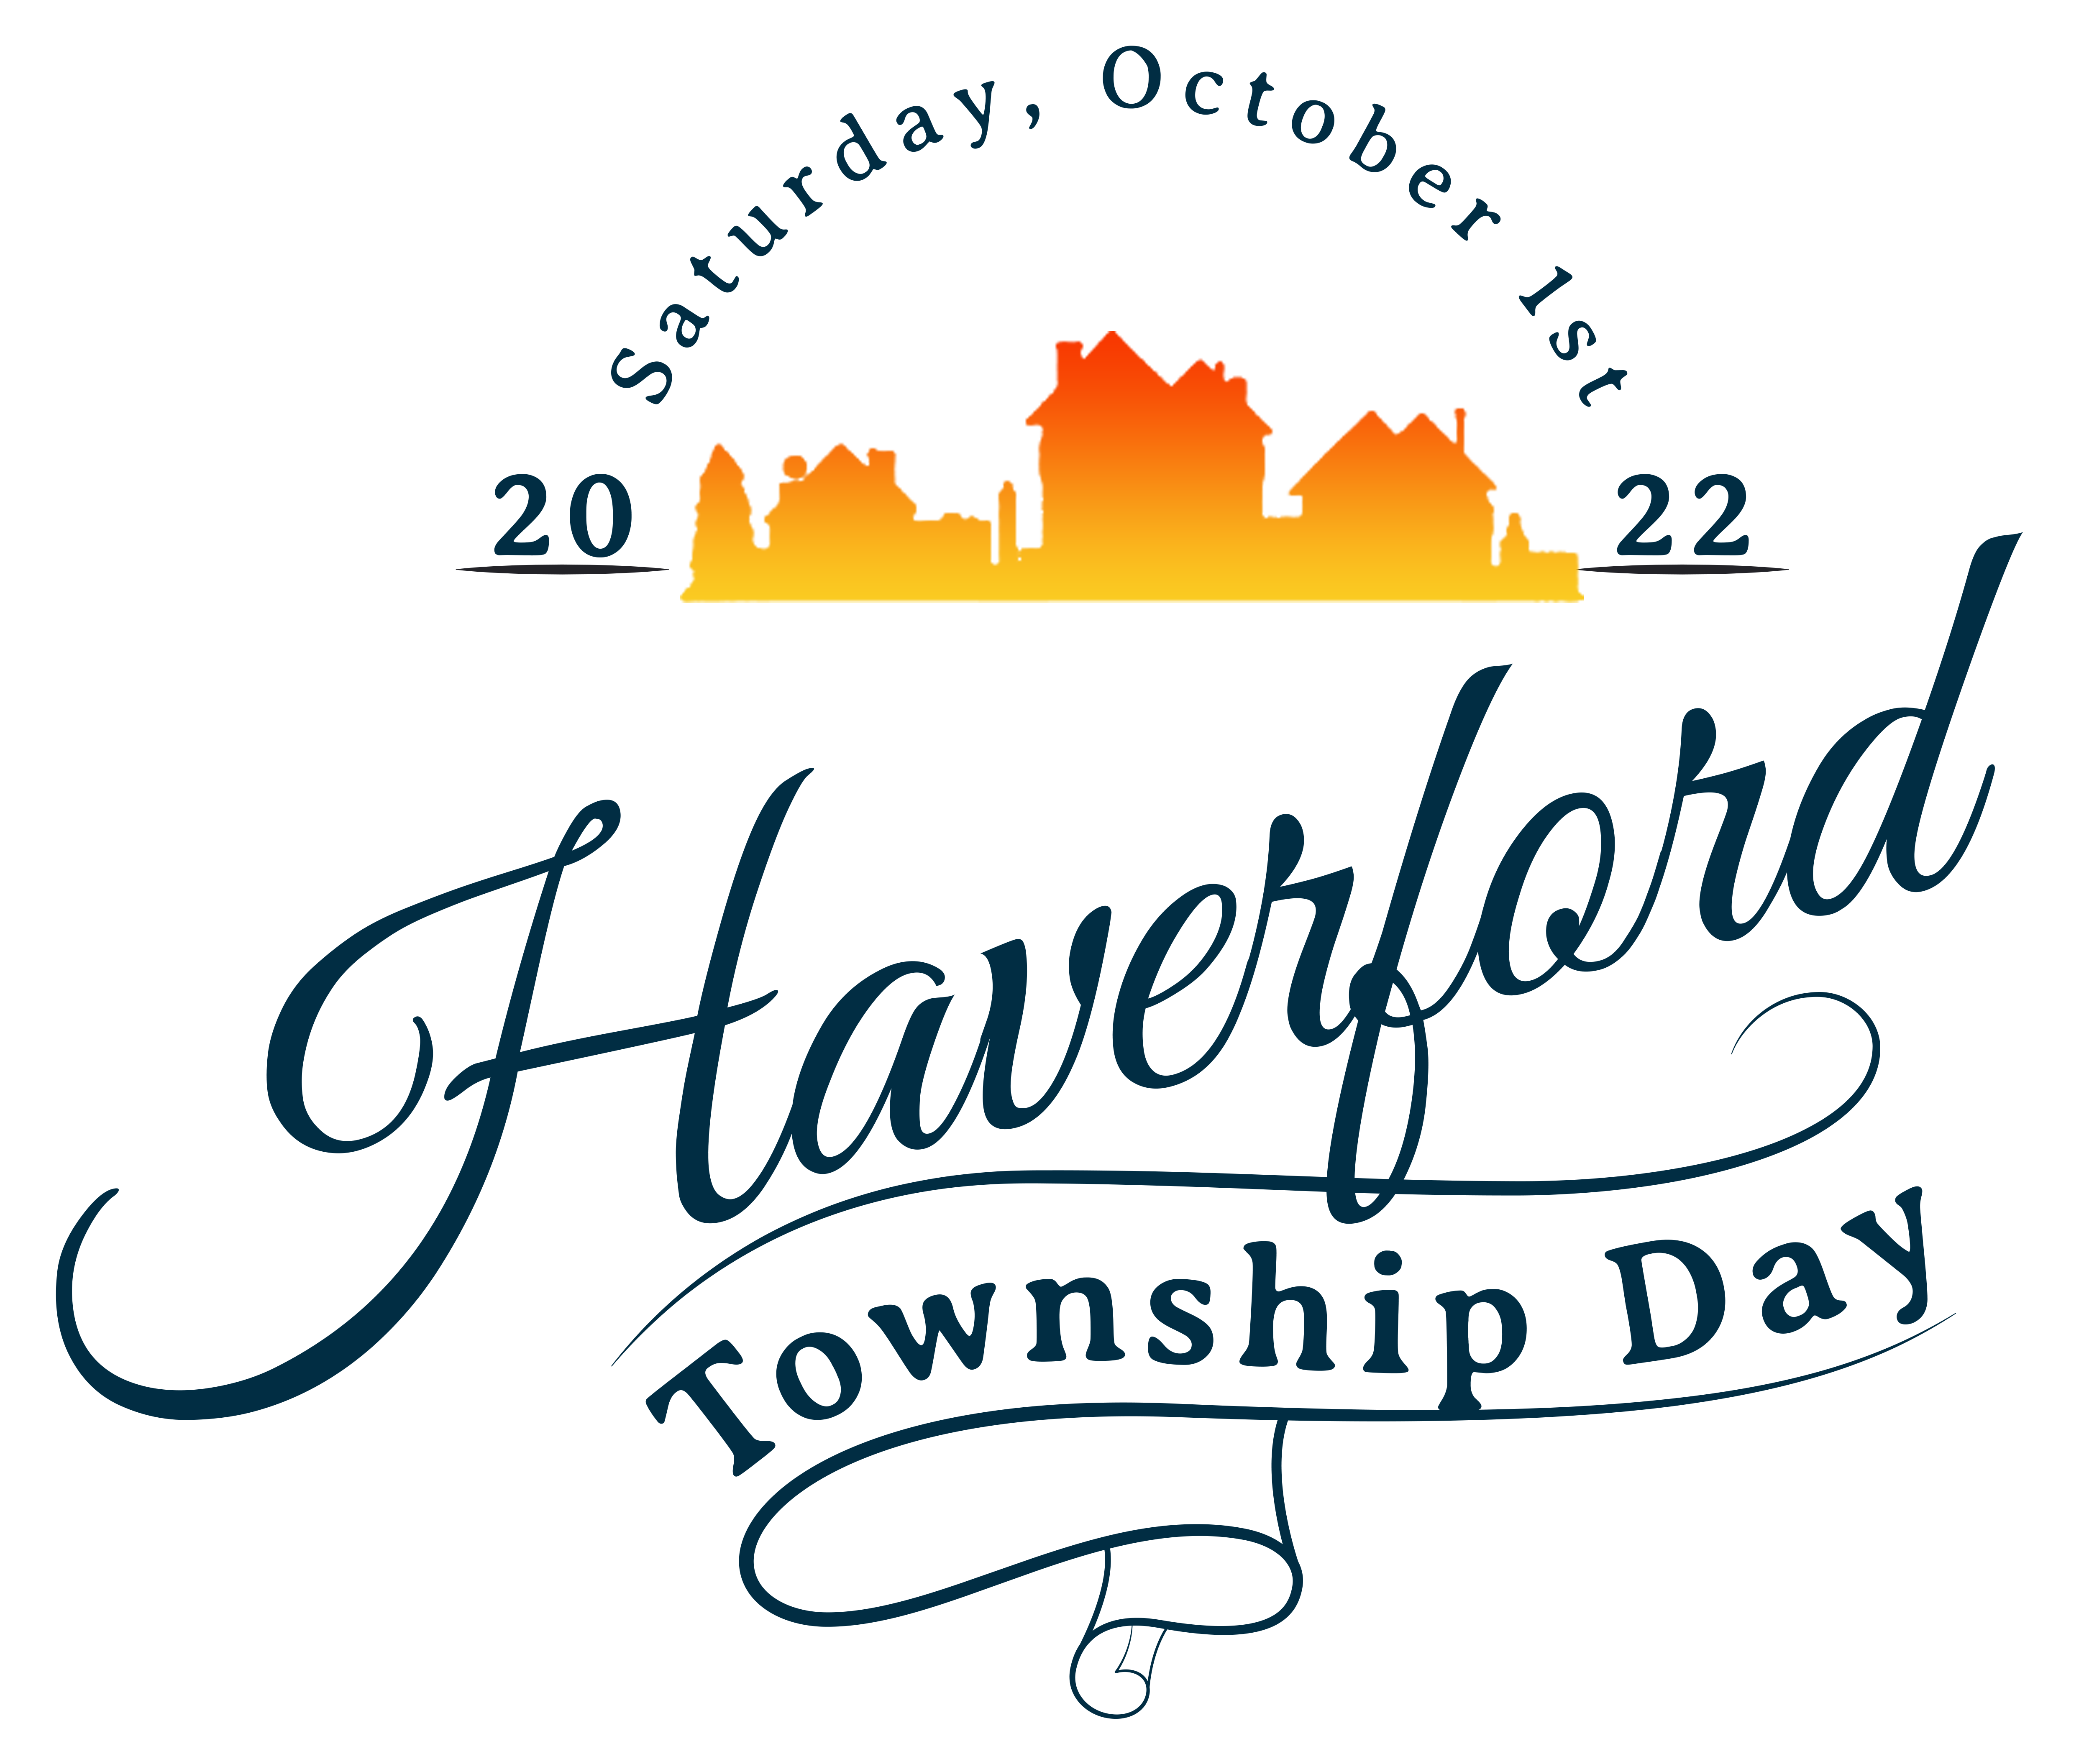 Haverford Township Day